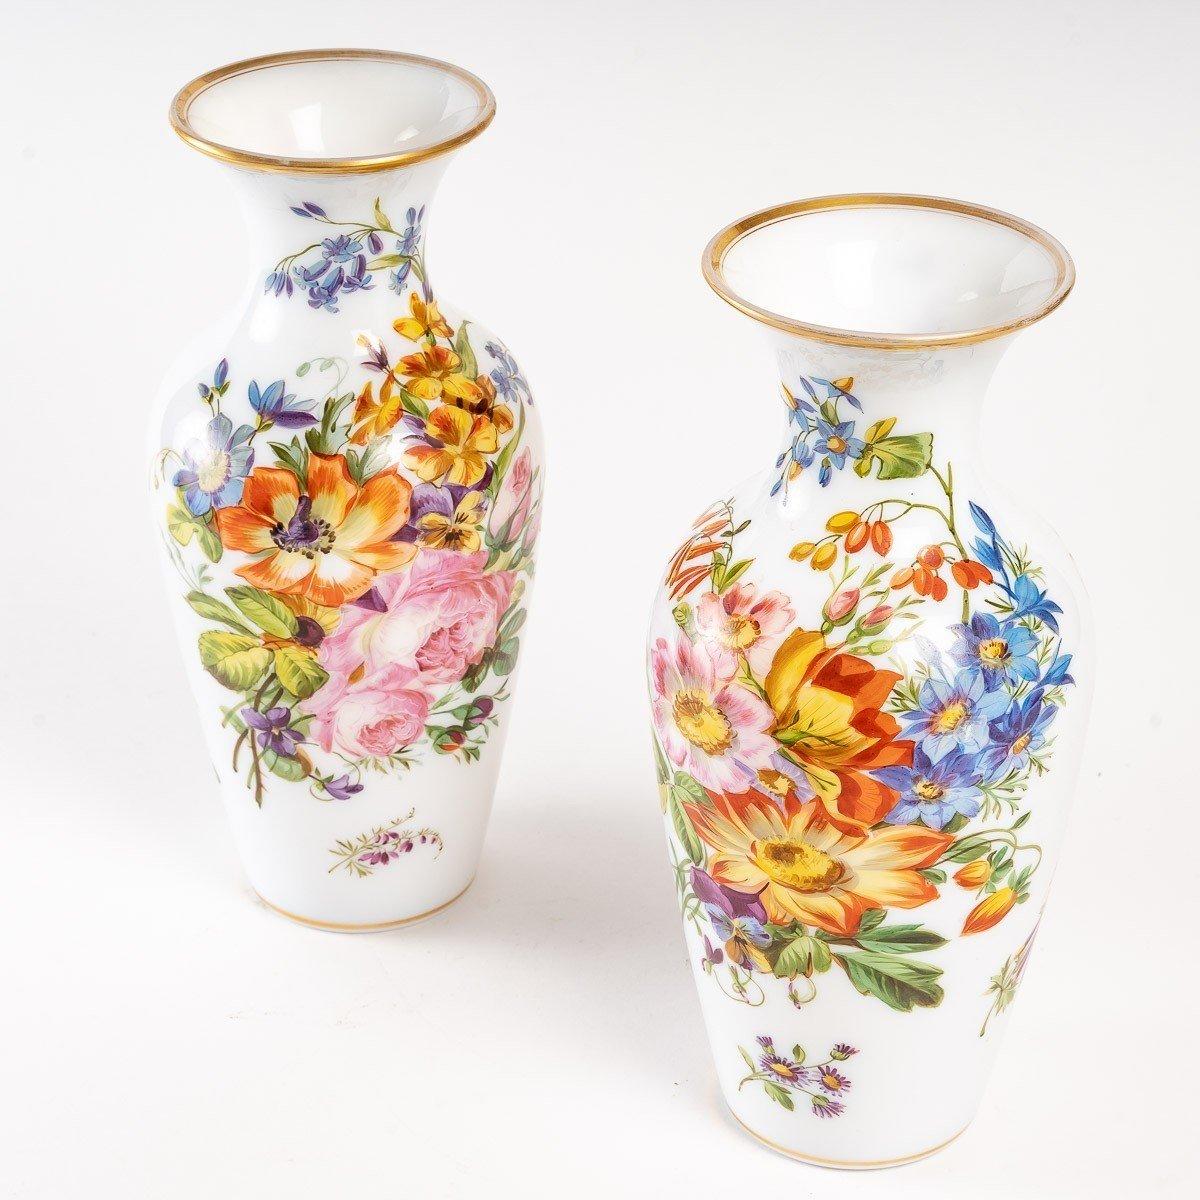 French Pair of Opaline Vases by Baccarat, Napoleon III Period